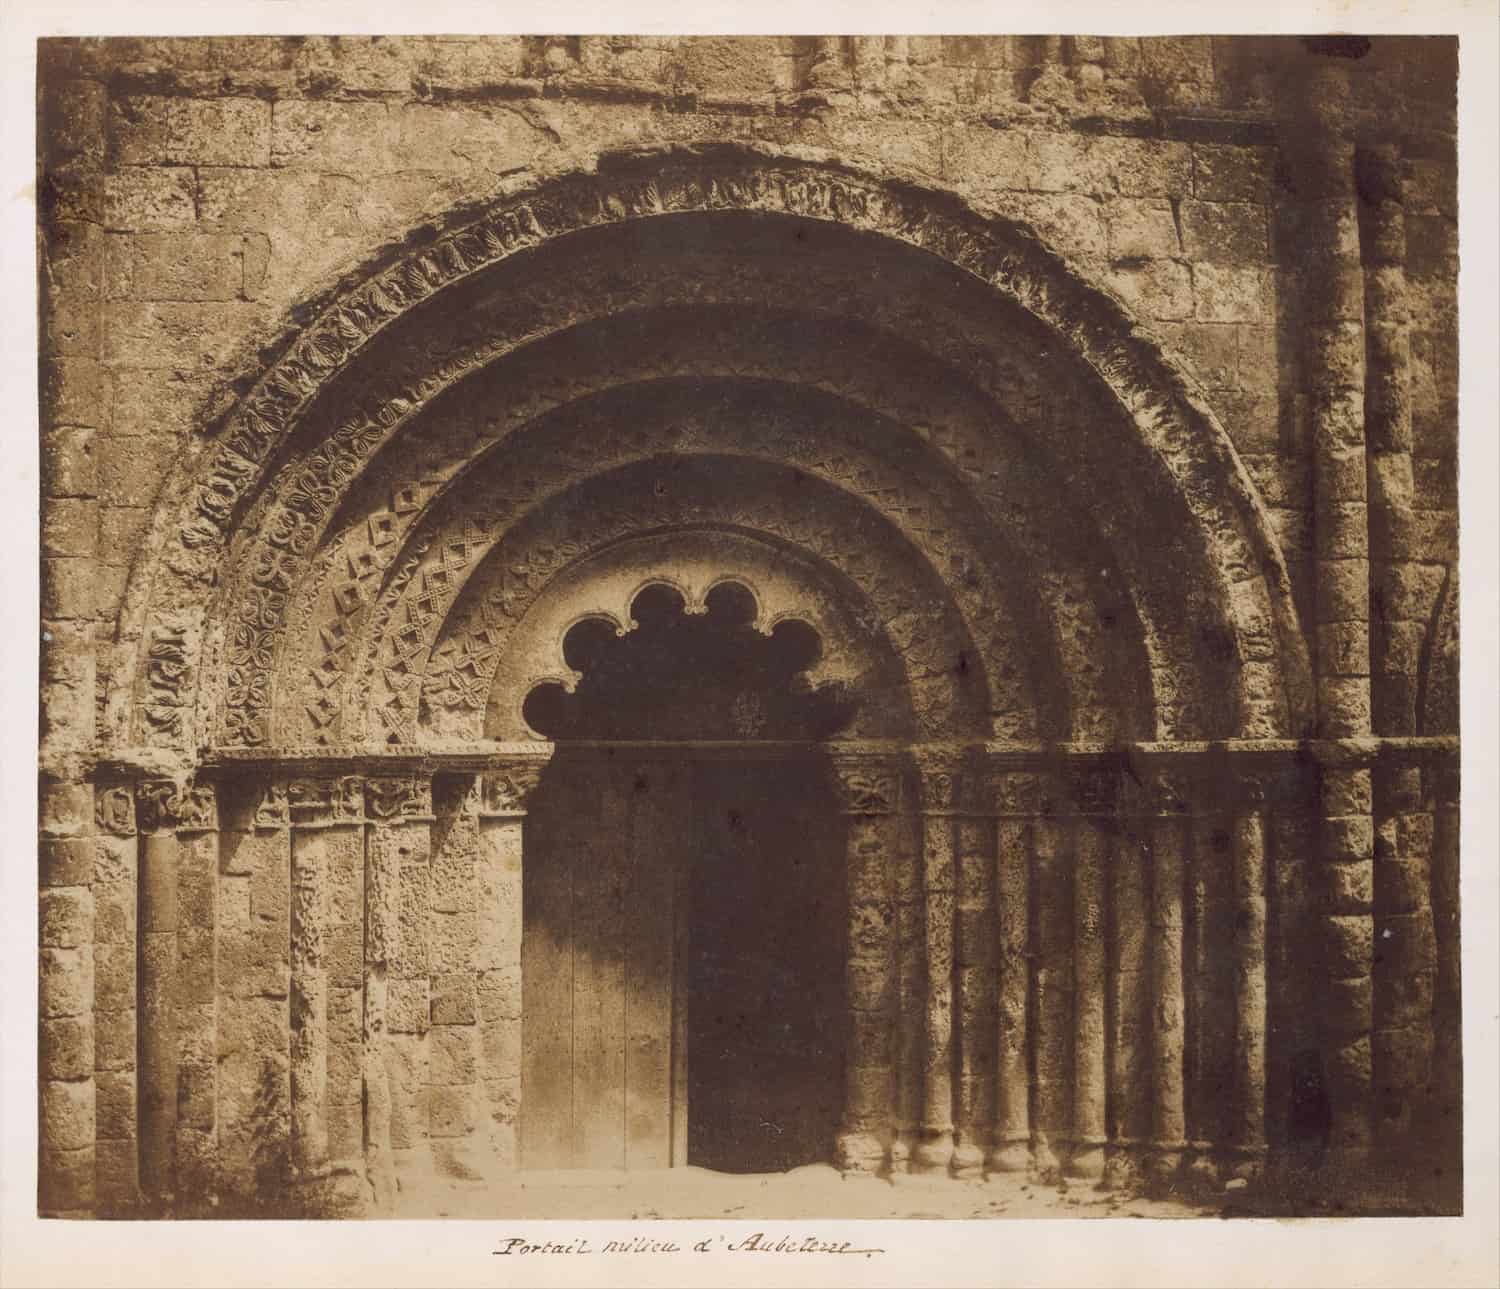 Portail milieu d'Aubeterre, 1851, Gustave Le Gray, The Metropolitan Museum of Art (article on milieu therapy)